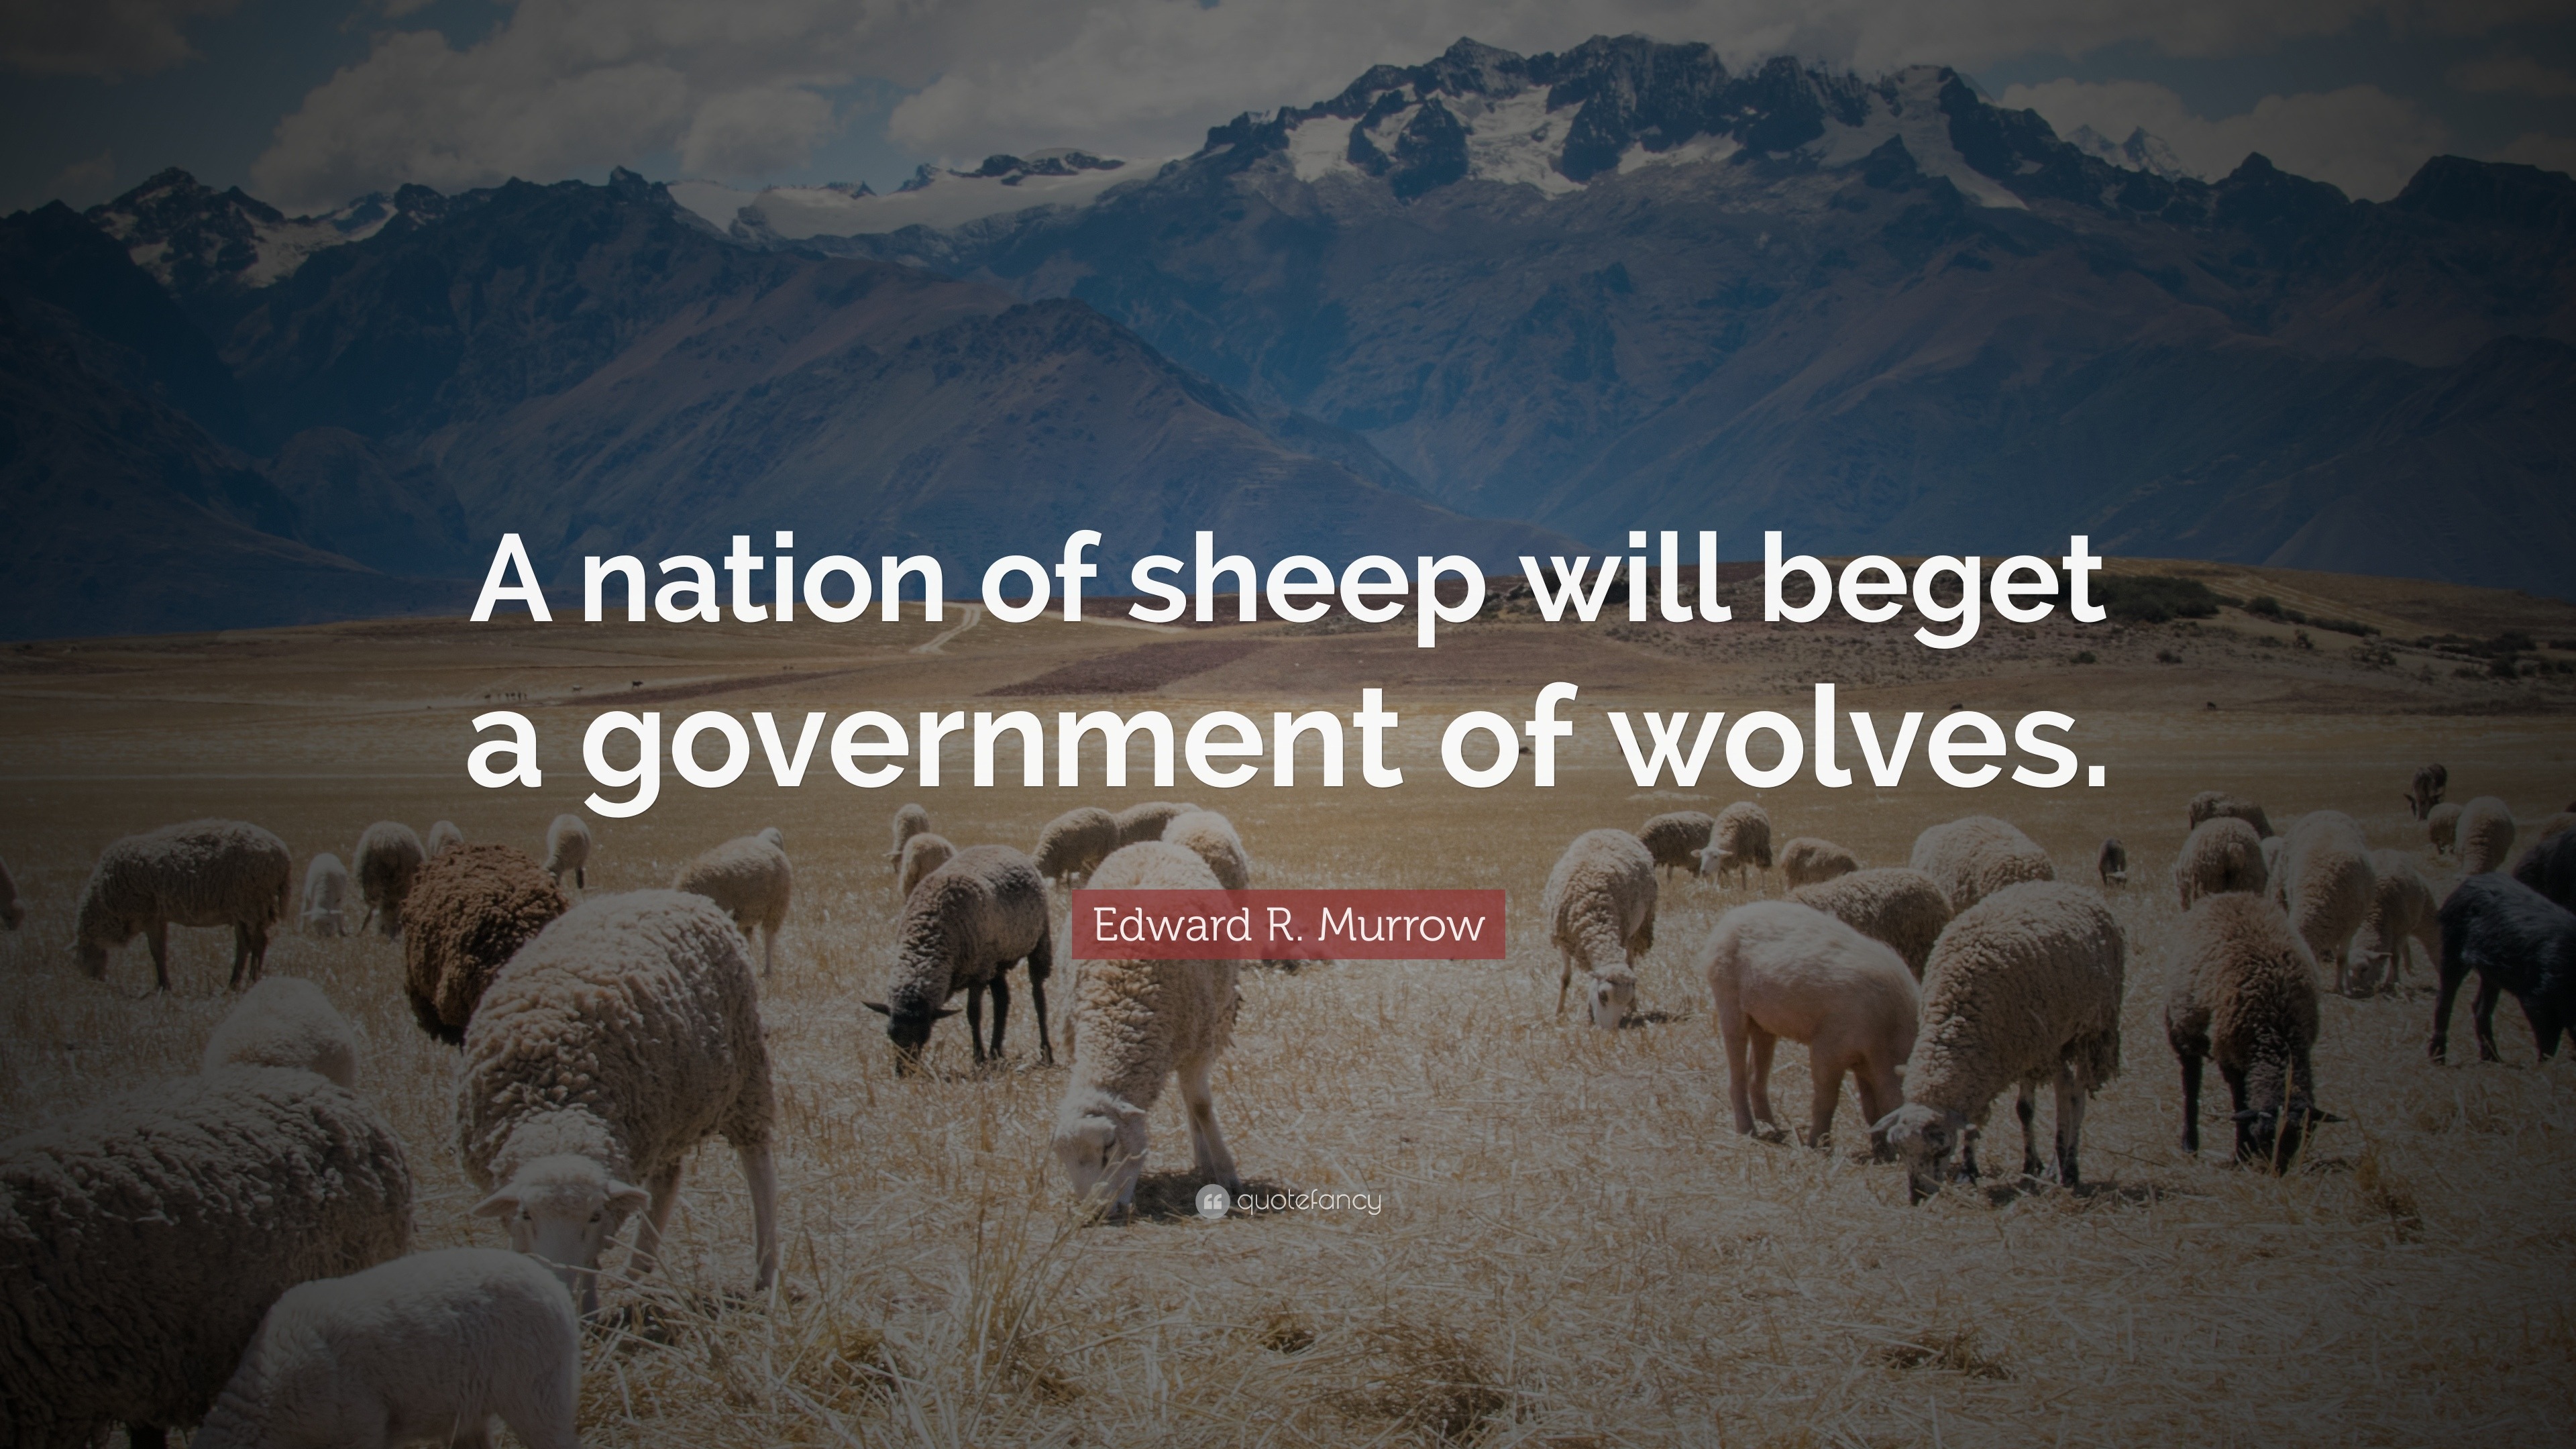 Edward R Murrow Quote A Nation Of Sheep Will Beget A Government Of Wolves